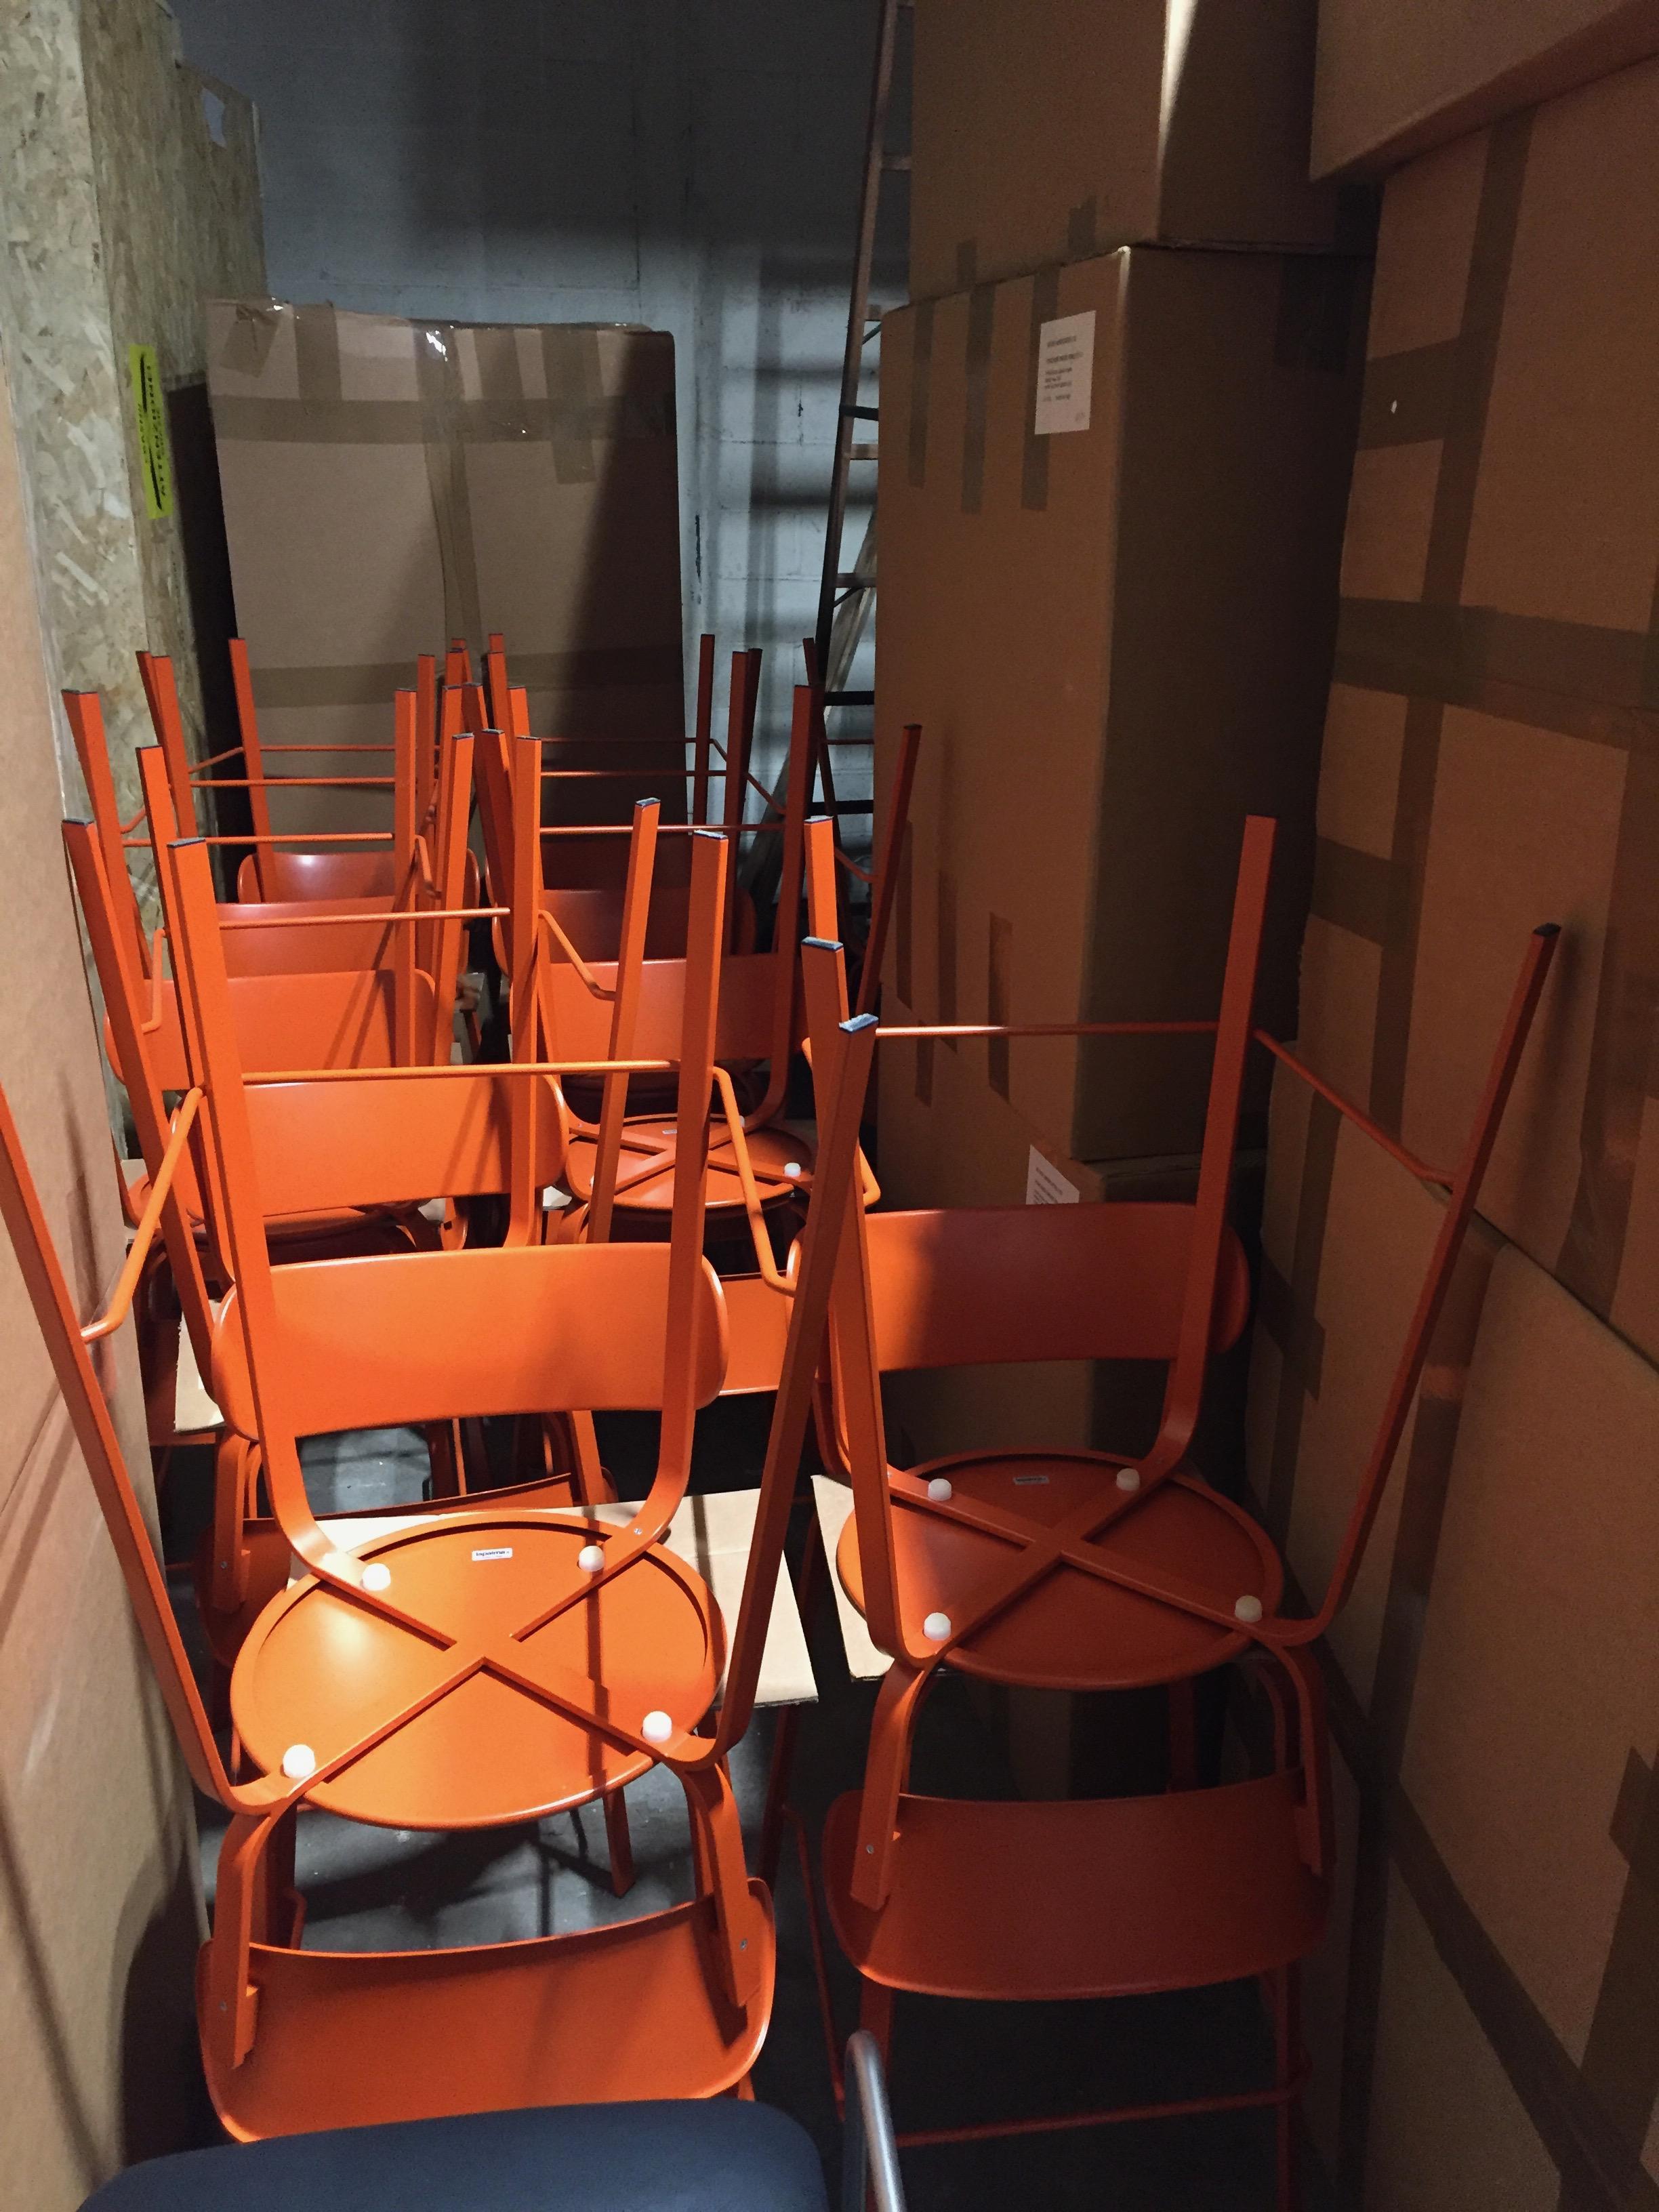 16 LaPalma Stil stools
Measures: Seat height of 25 1/2”. 
Orange RAL color 2001.
Extremely light and produced in orange color metal, stackable stools.